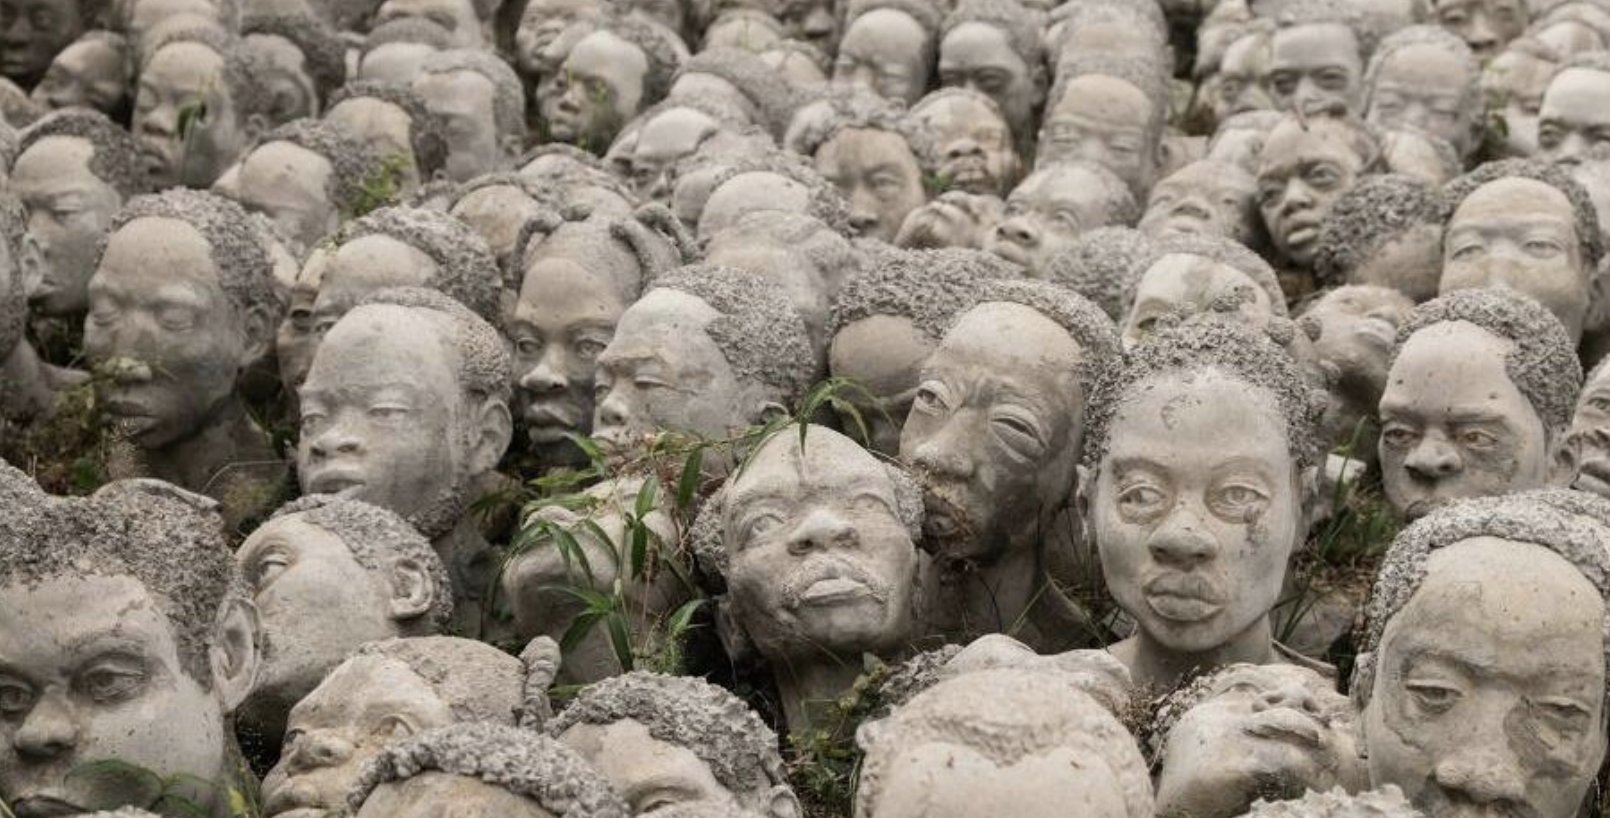 Ghanaian Artist Commemorate Slave Trade By Sculpting Slave Heads